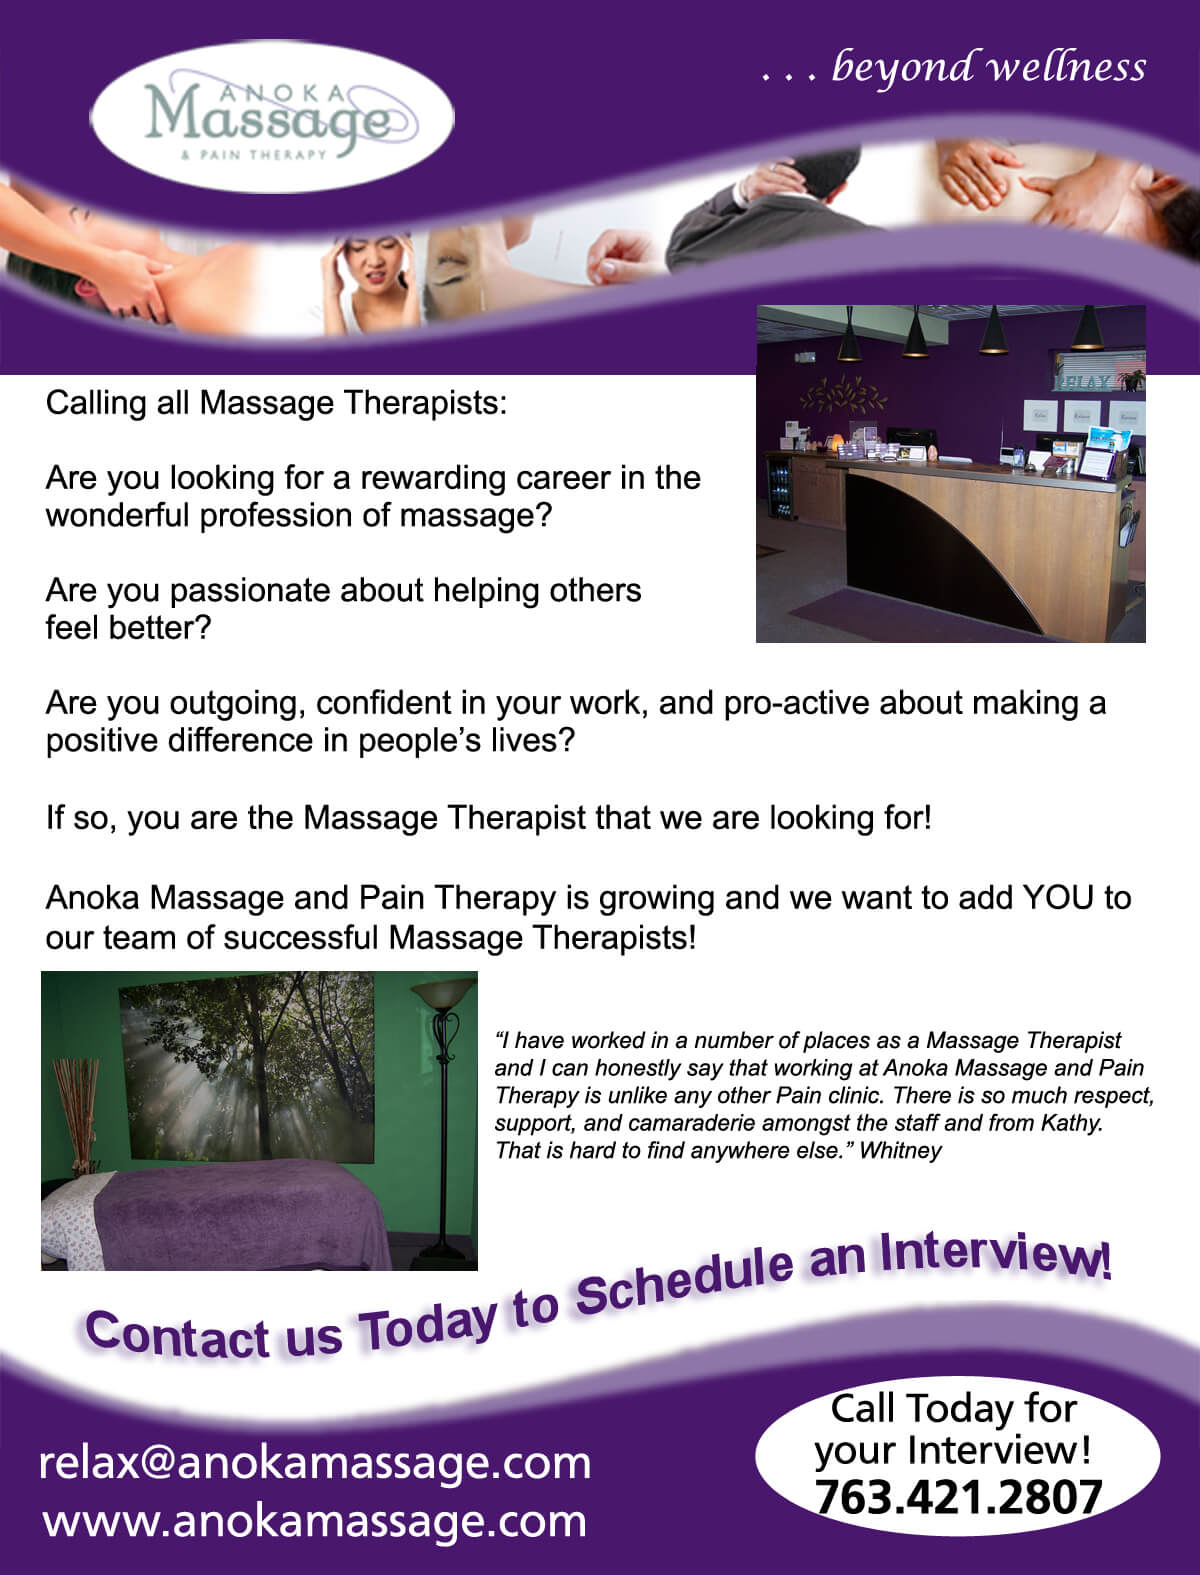 Hiring Flyer - Anoka Massage and Pain Therapy